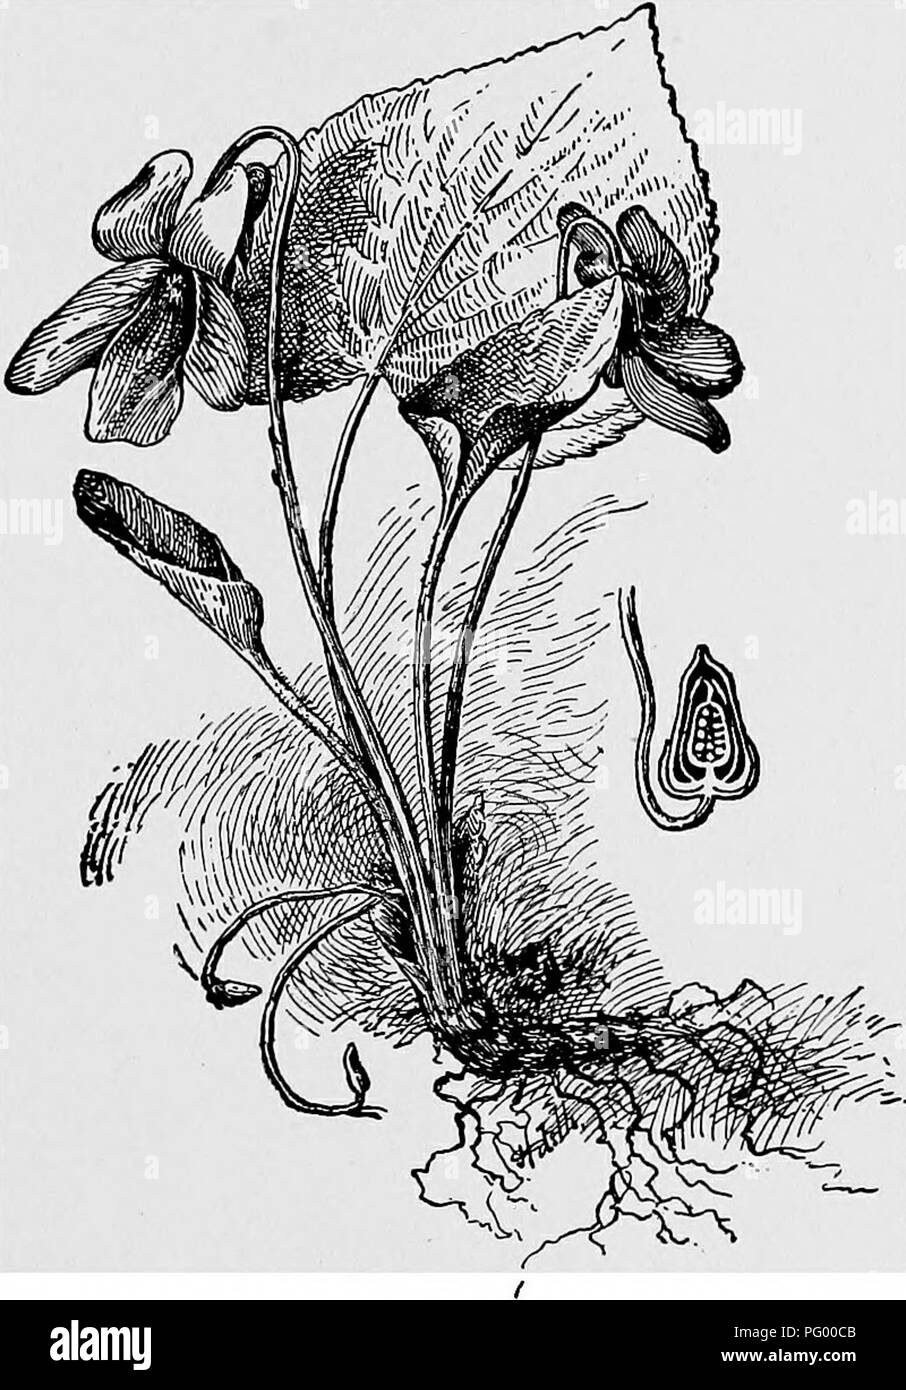 . Lessons in botany. Botany. VIOLA CE^E. 261 nated, because being closed, and because of the position of the anthers around the stigma the pollen from the opening anthers comes directly in contact with the stigma. In the flowers of the pansy cross-pollination often takes place. Fig. 222. Viola cucullata ; blue flowers above, cleistogamous flowers smaller and' curved below. Section of pistil at right. through the agency of insects. While the blue flowers of the blue violet rarely set fruit, nevertheless pollination and fertilization do take place in some of the flowers, though fruit sets more a Stock Photo